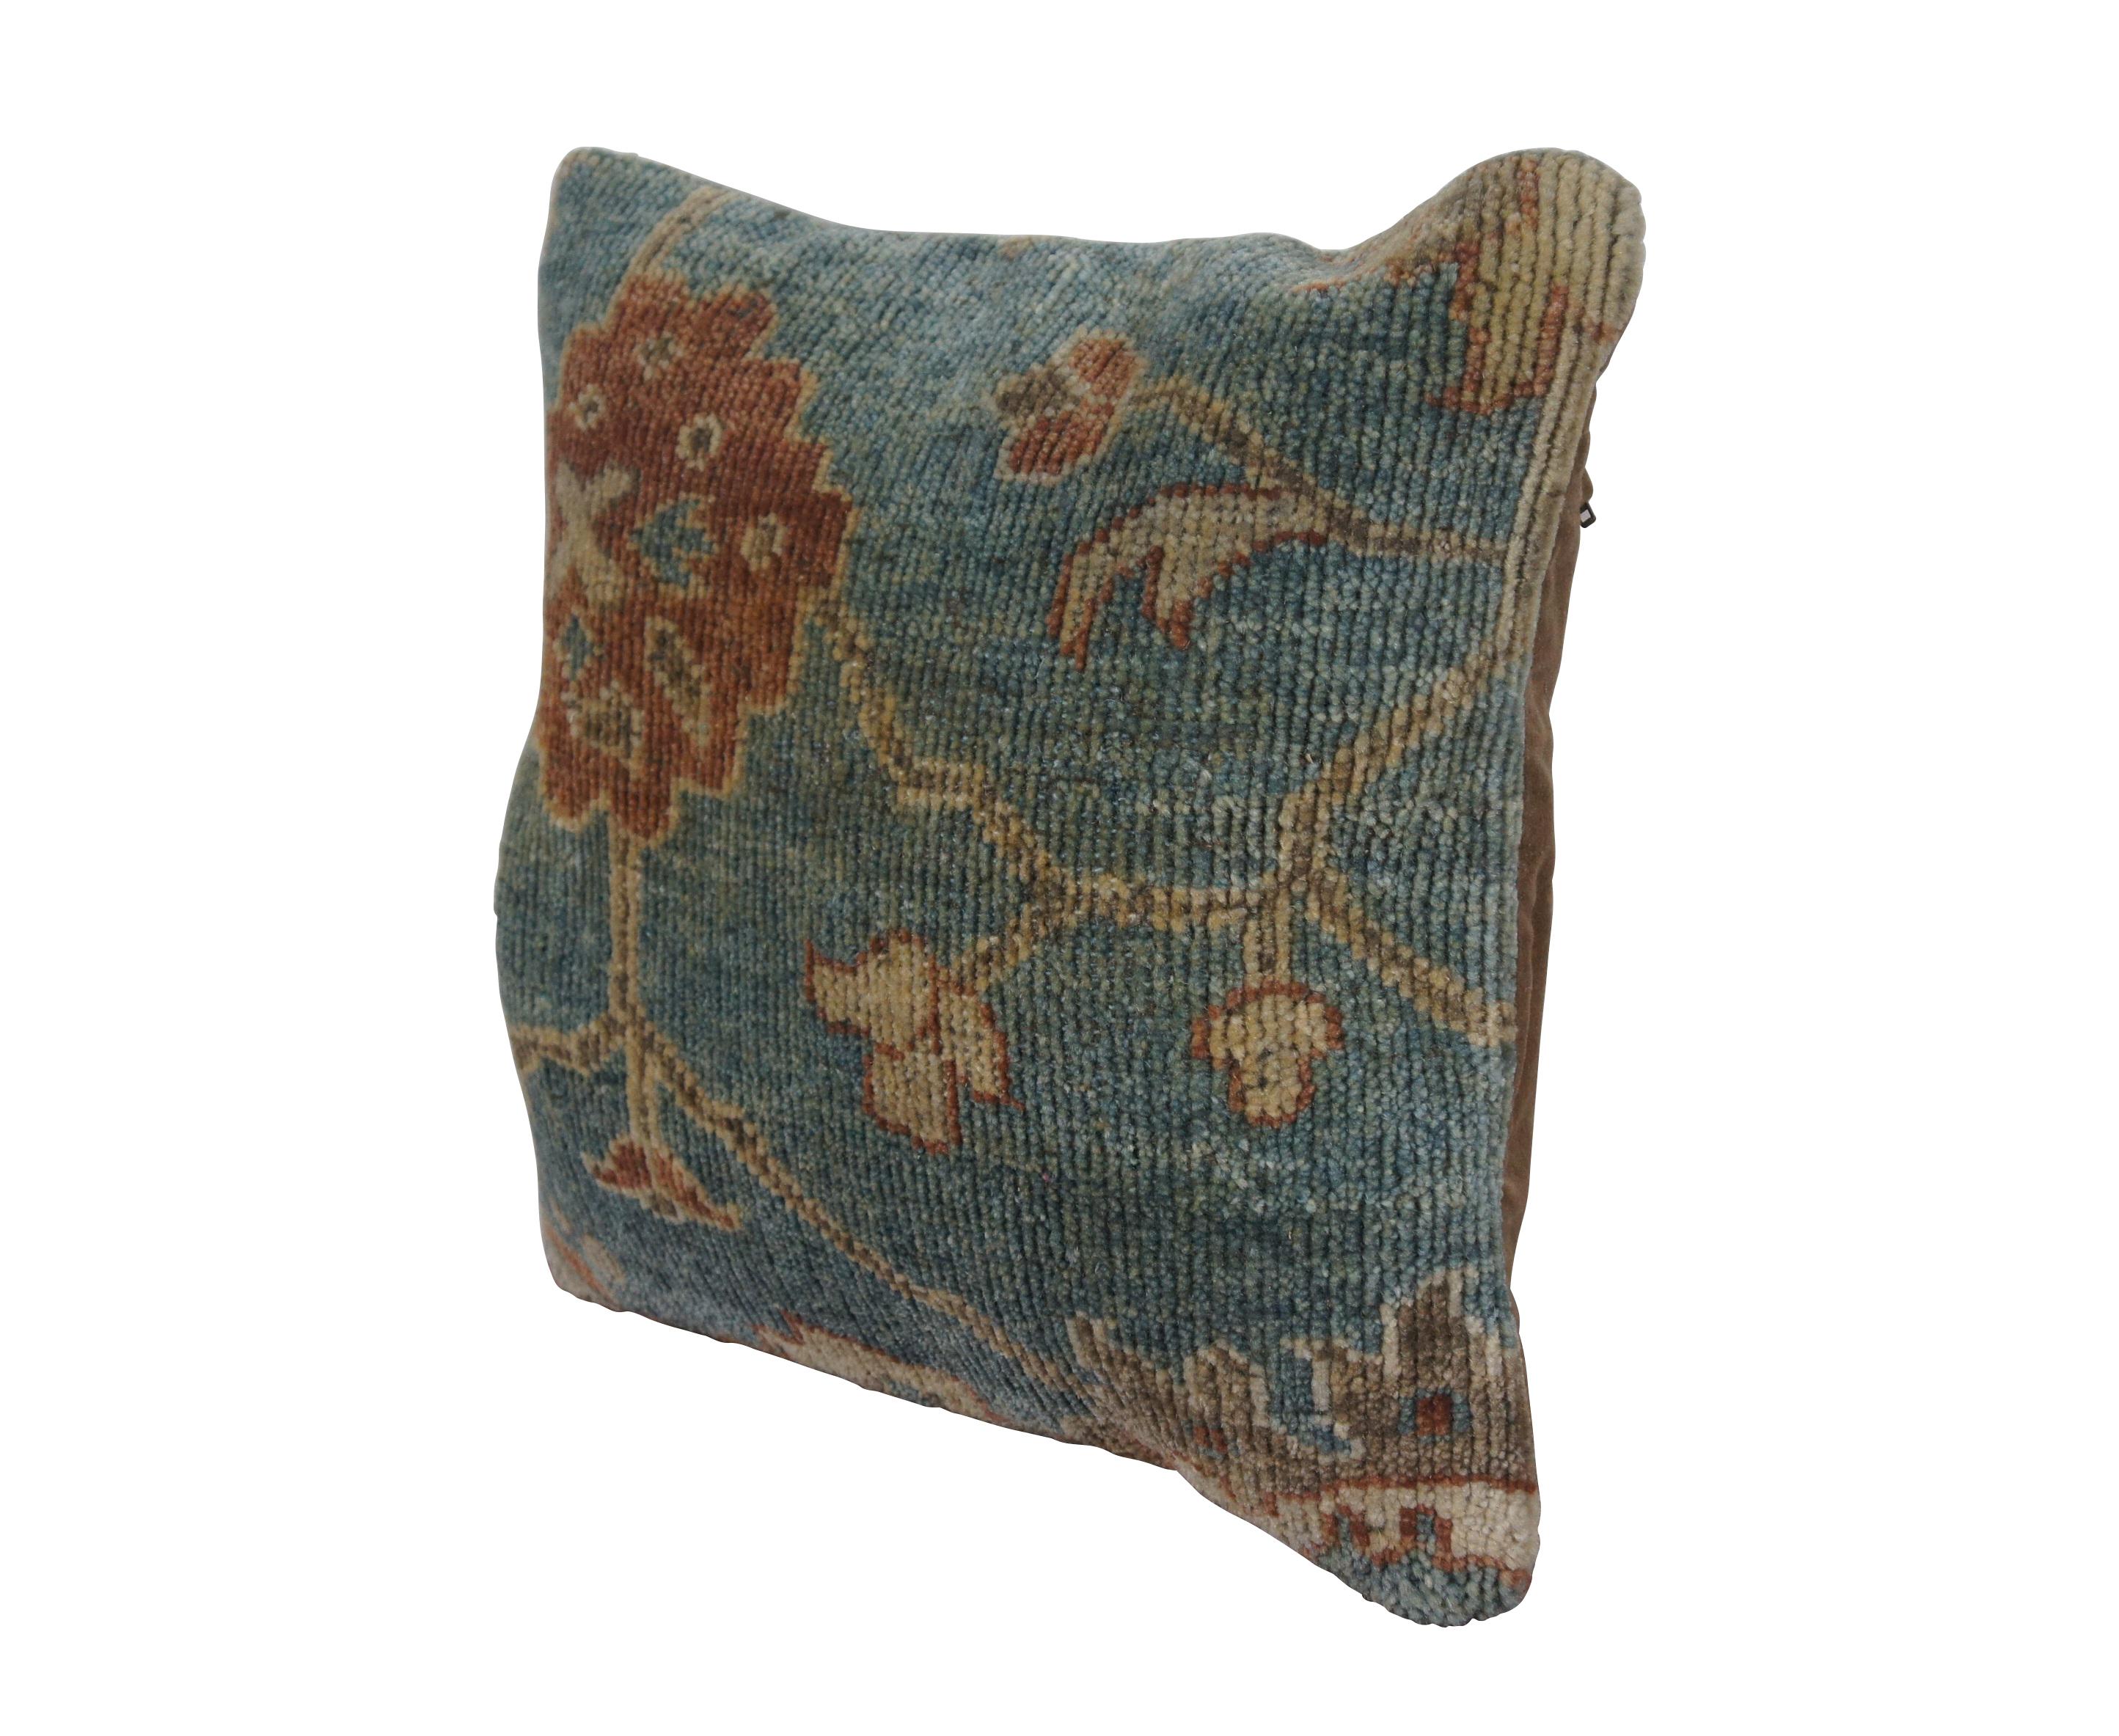 Late 20th century square throw pillow by Pottery Barn, featuring a wool and cotton carpet inspired floral design in brown and orange on a blue background. Brown cotton velour back with zipper closure. Down filled. Made in India.

Dimensions:
18